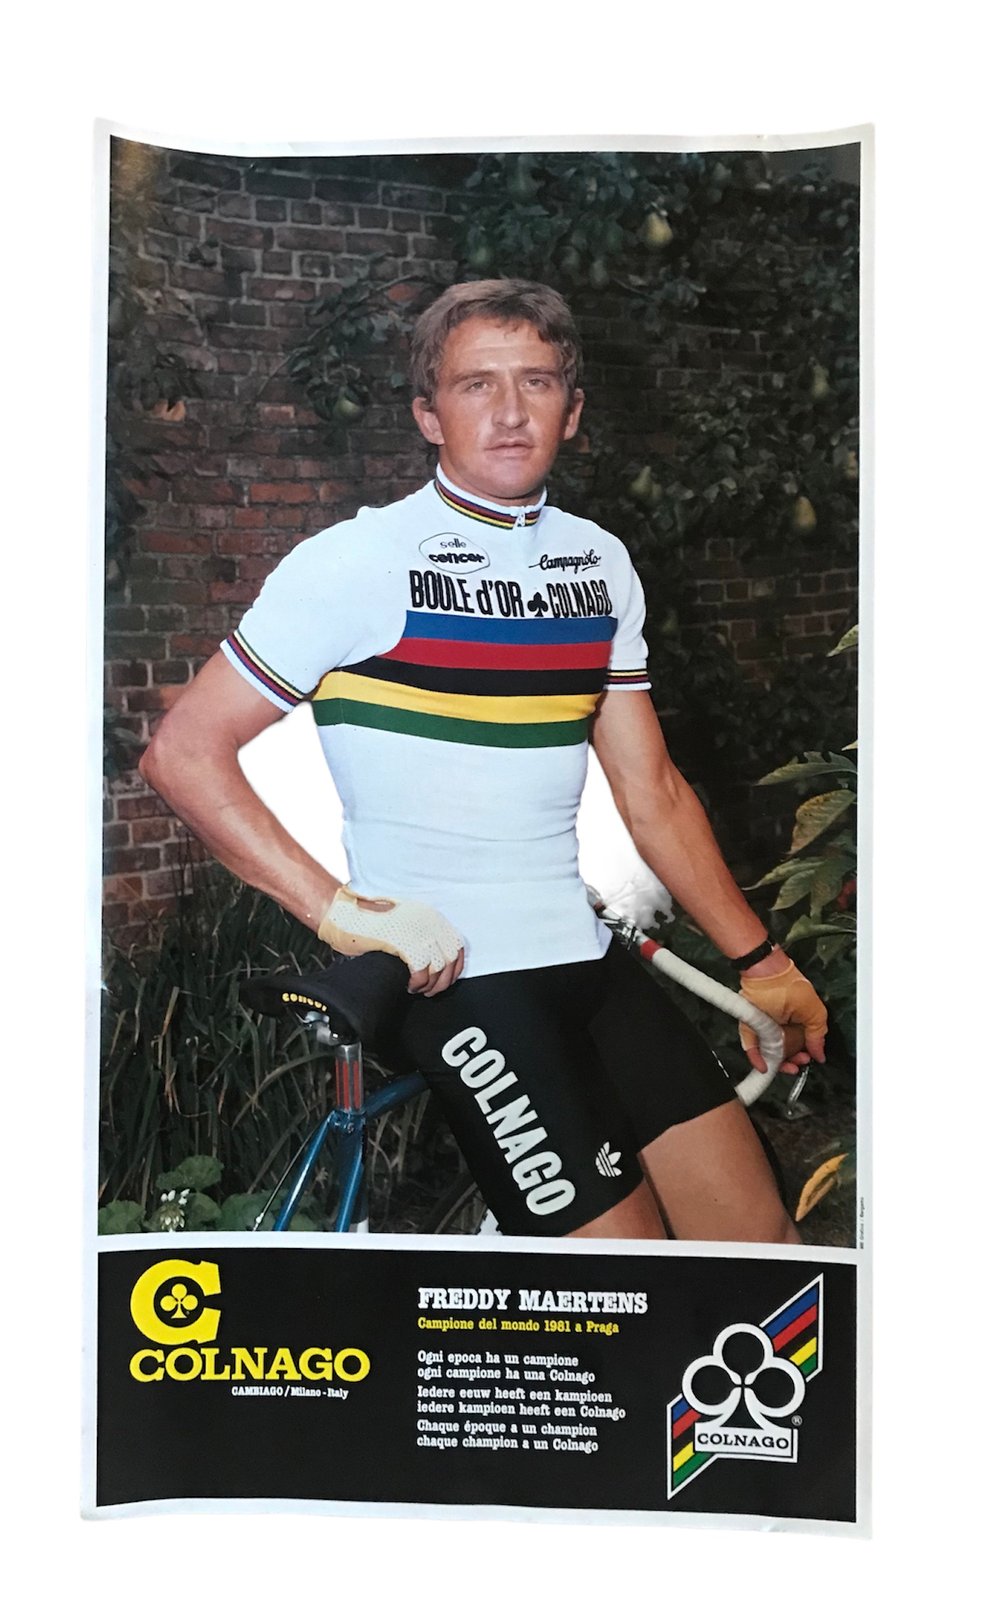 Advertising poster of Freddy Maertens by Colnago